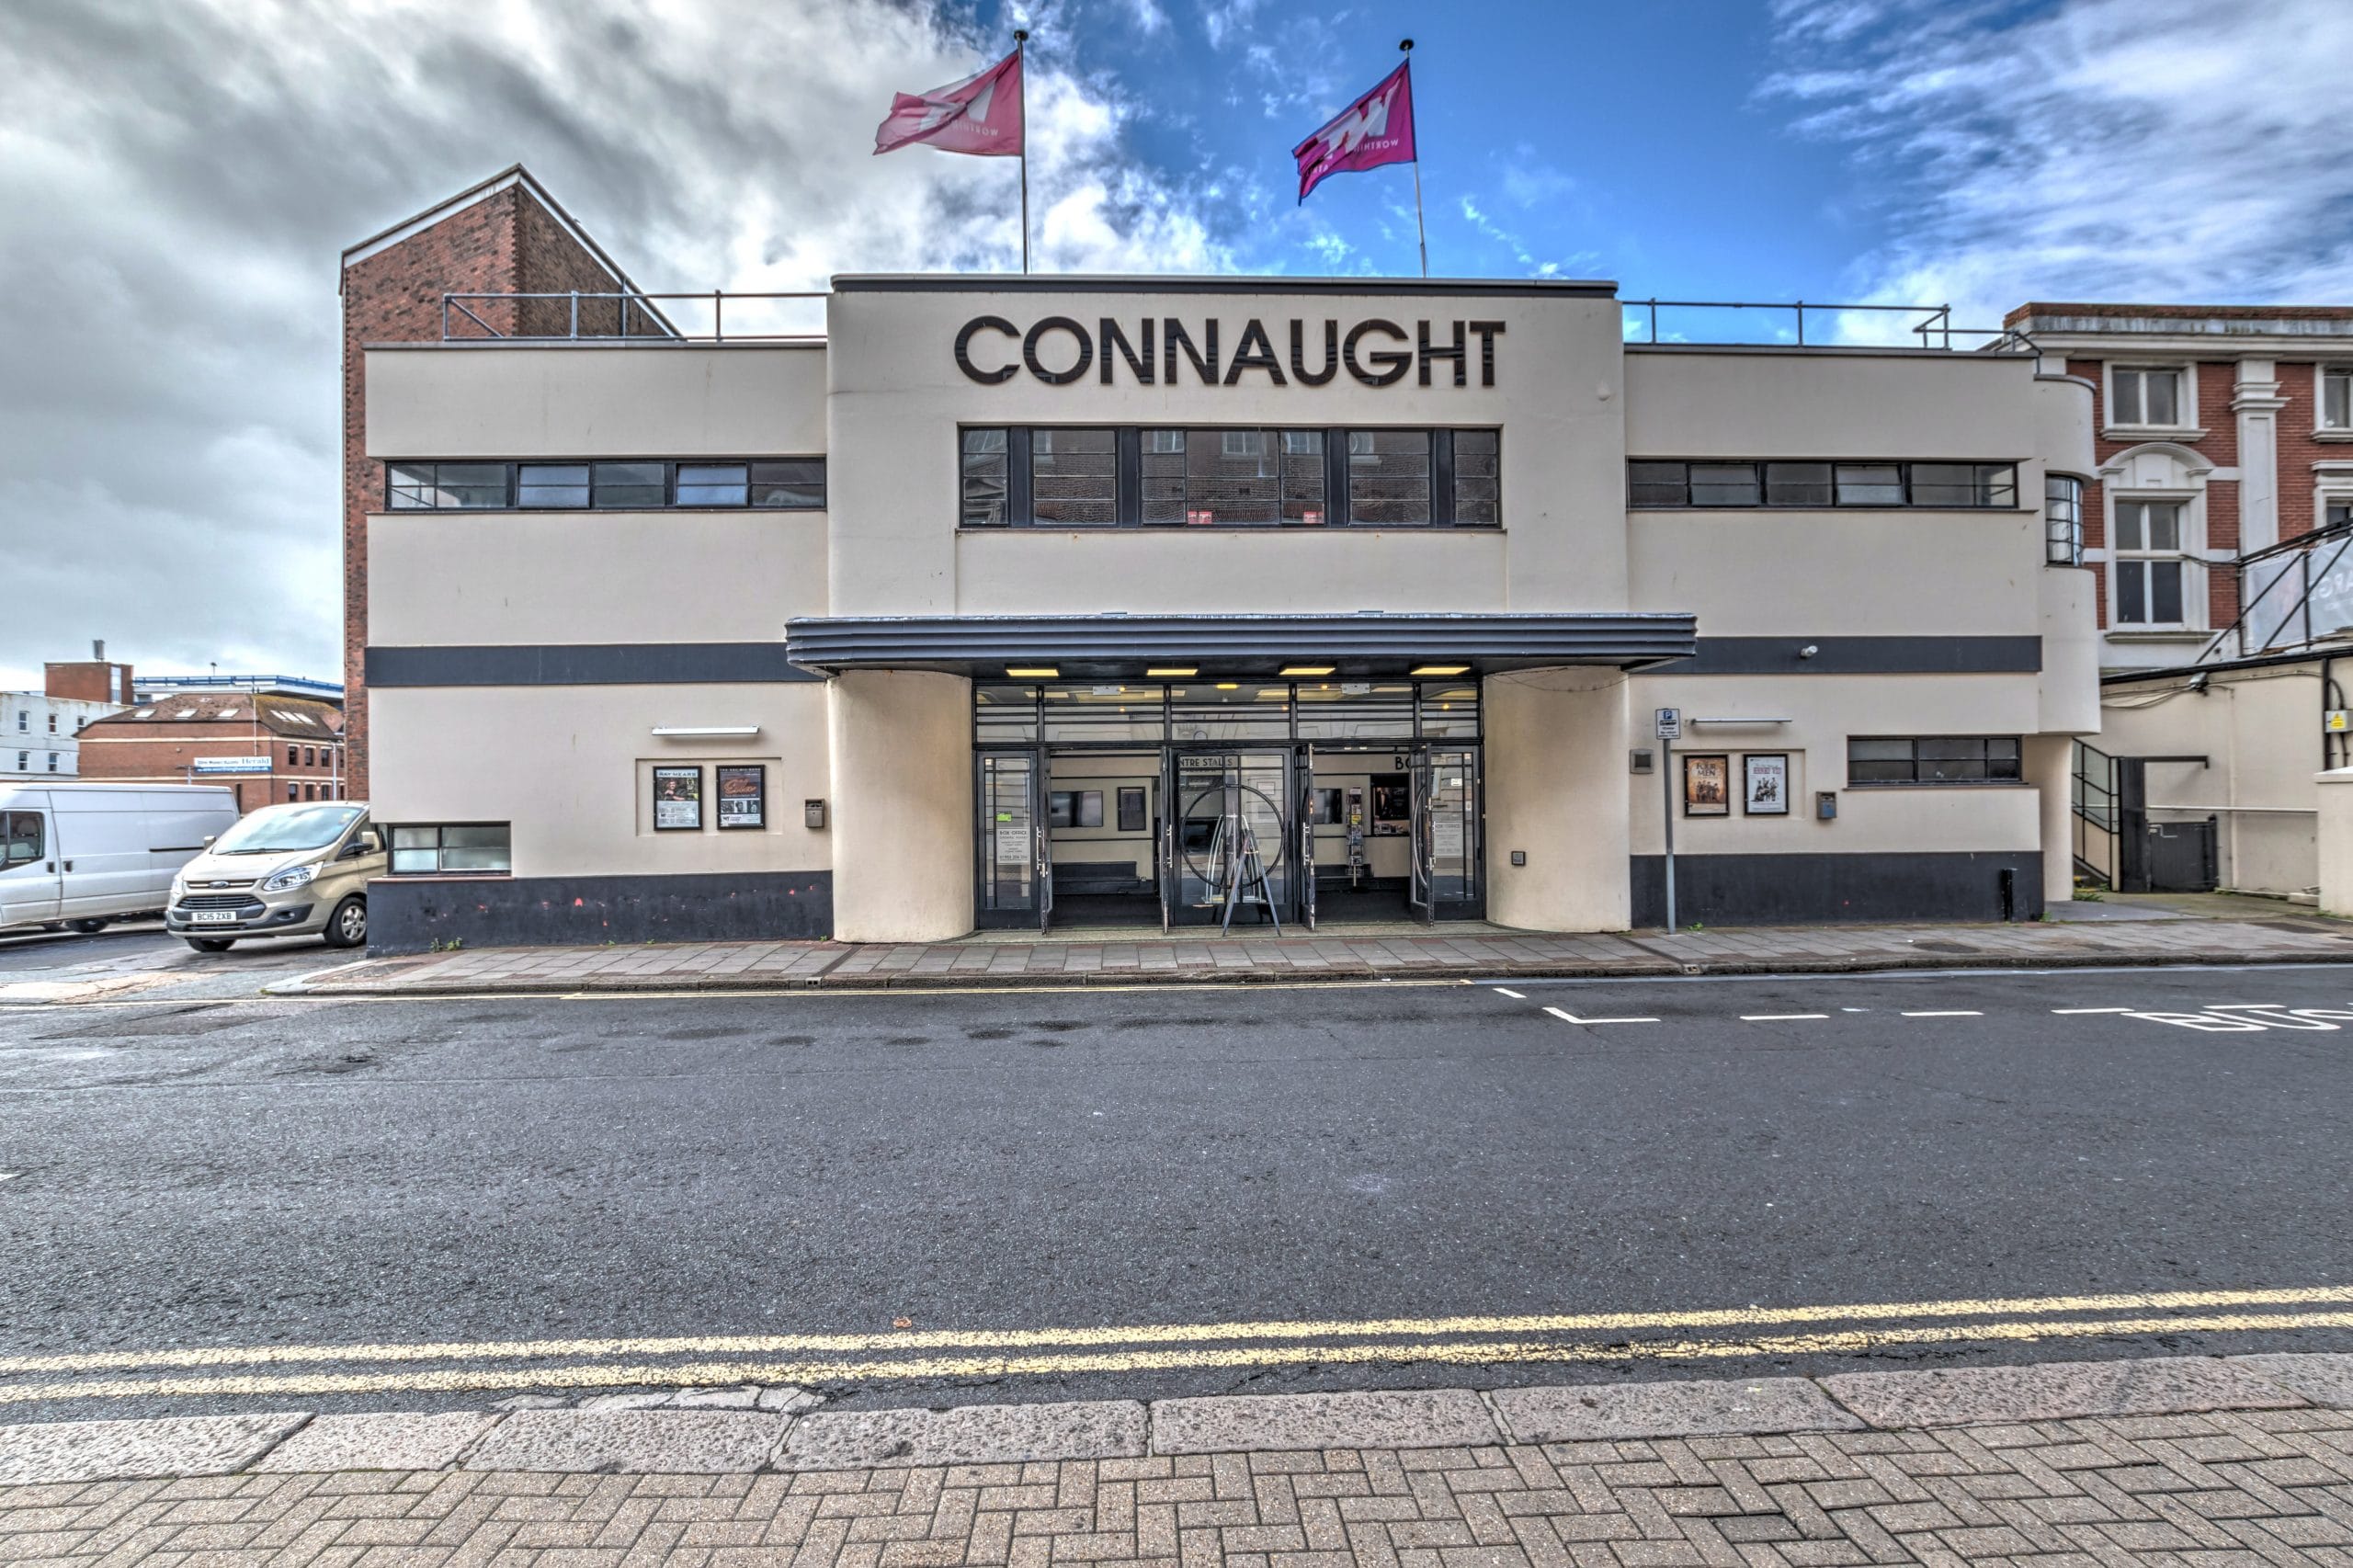 Installation of Air System at the Connaught Theatre